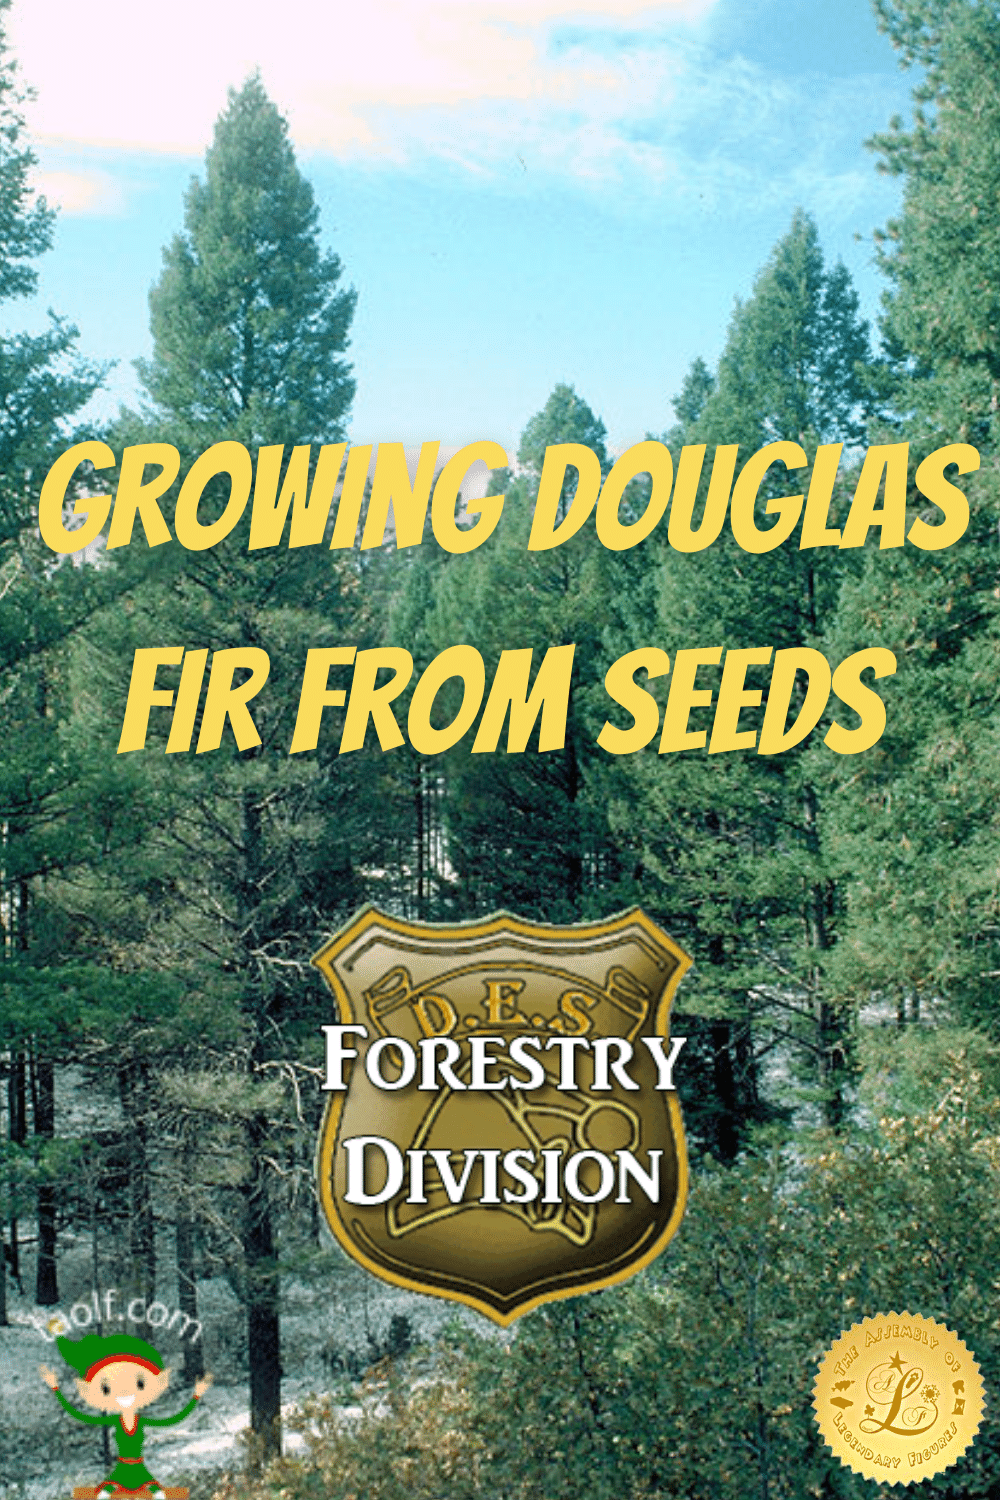 Directions for Growing Douglas Fir from Seeds